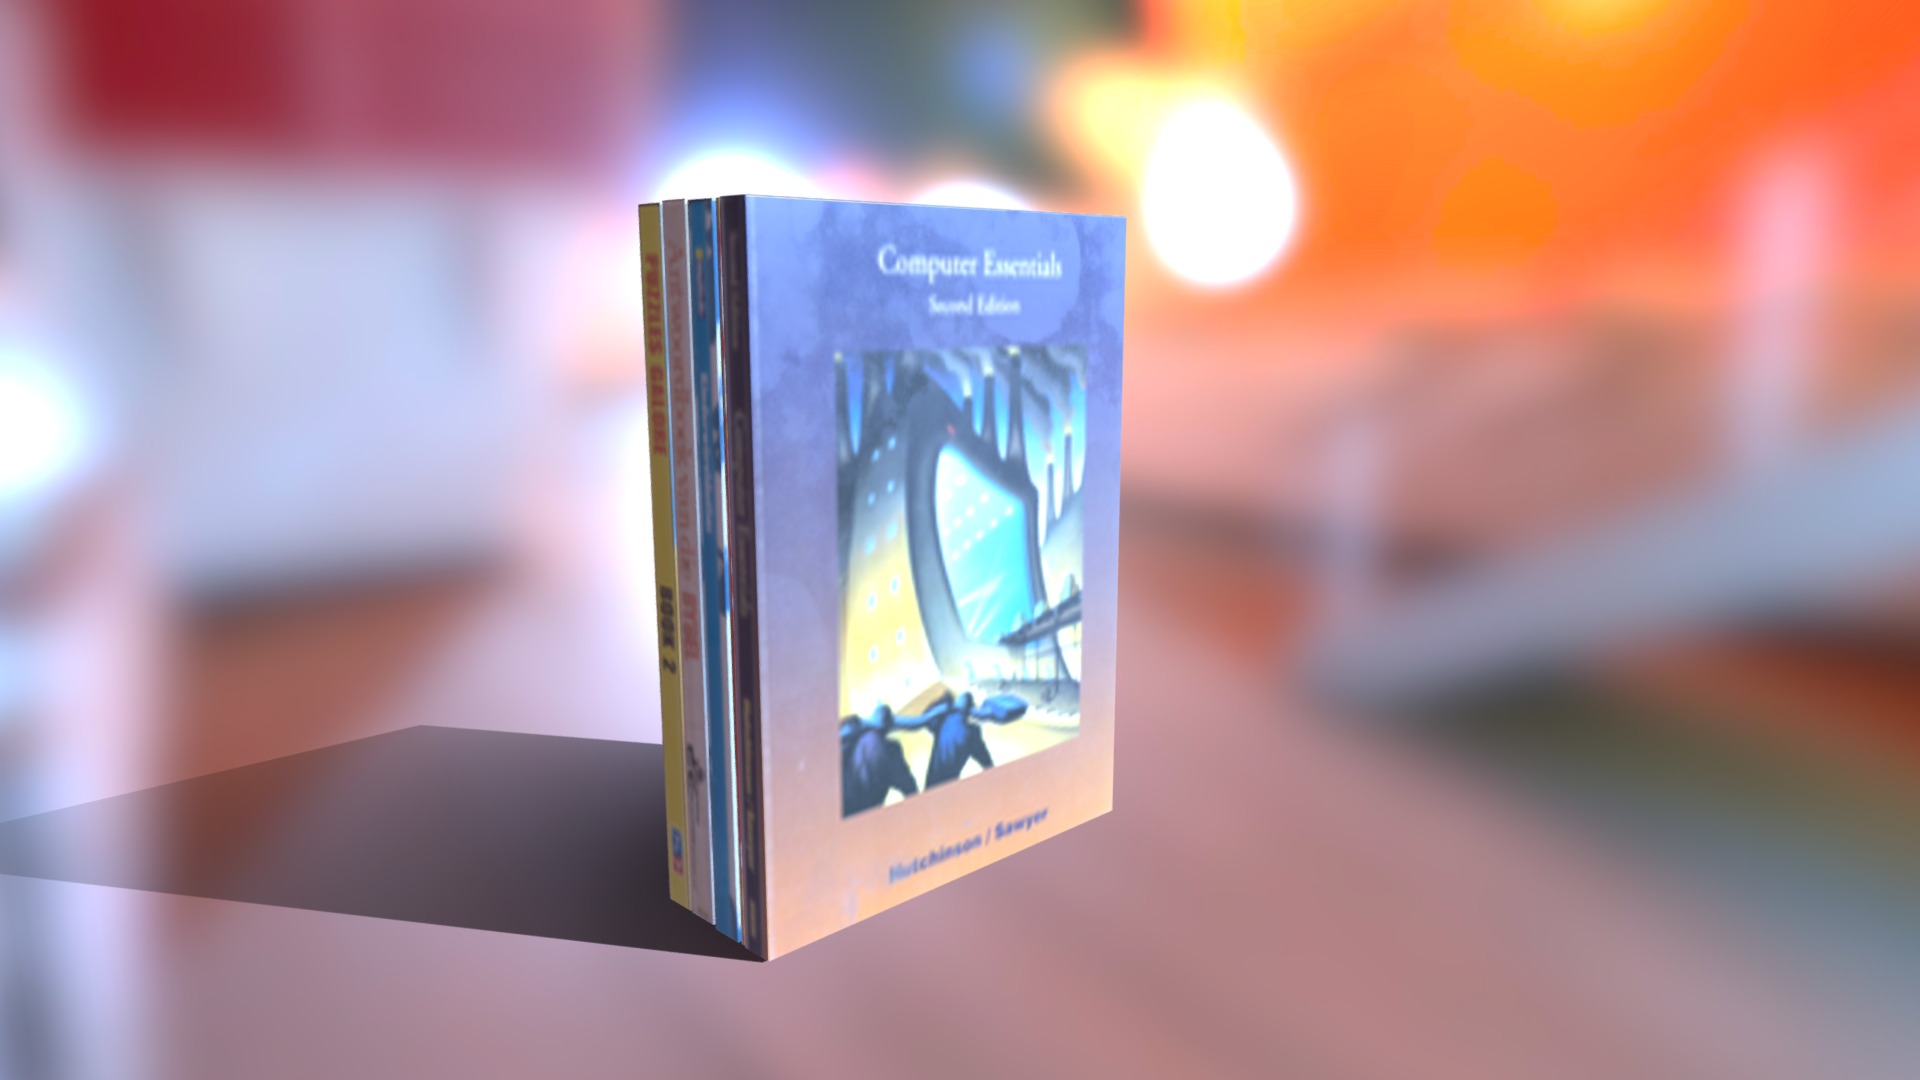 3D model Books Market - This is a 3D model of the Books Market. The 3D model is about a book on a table.